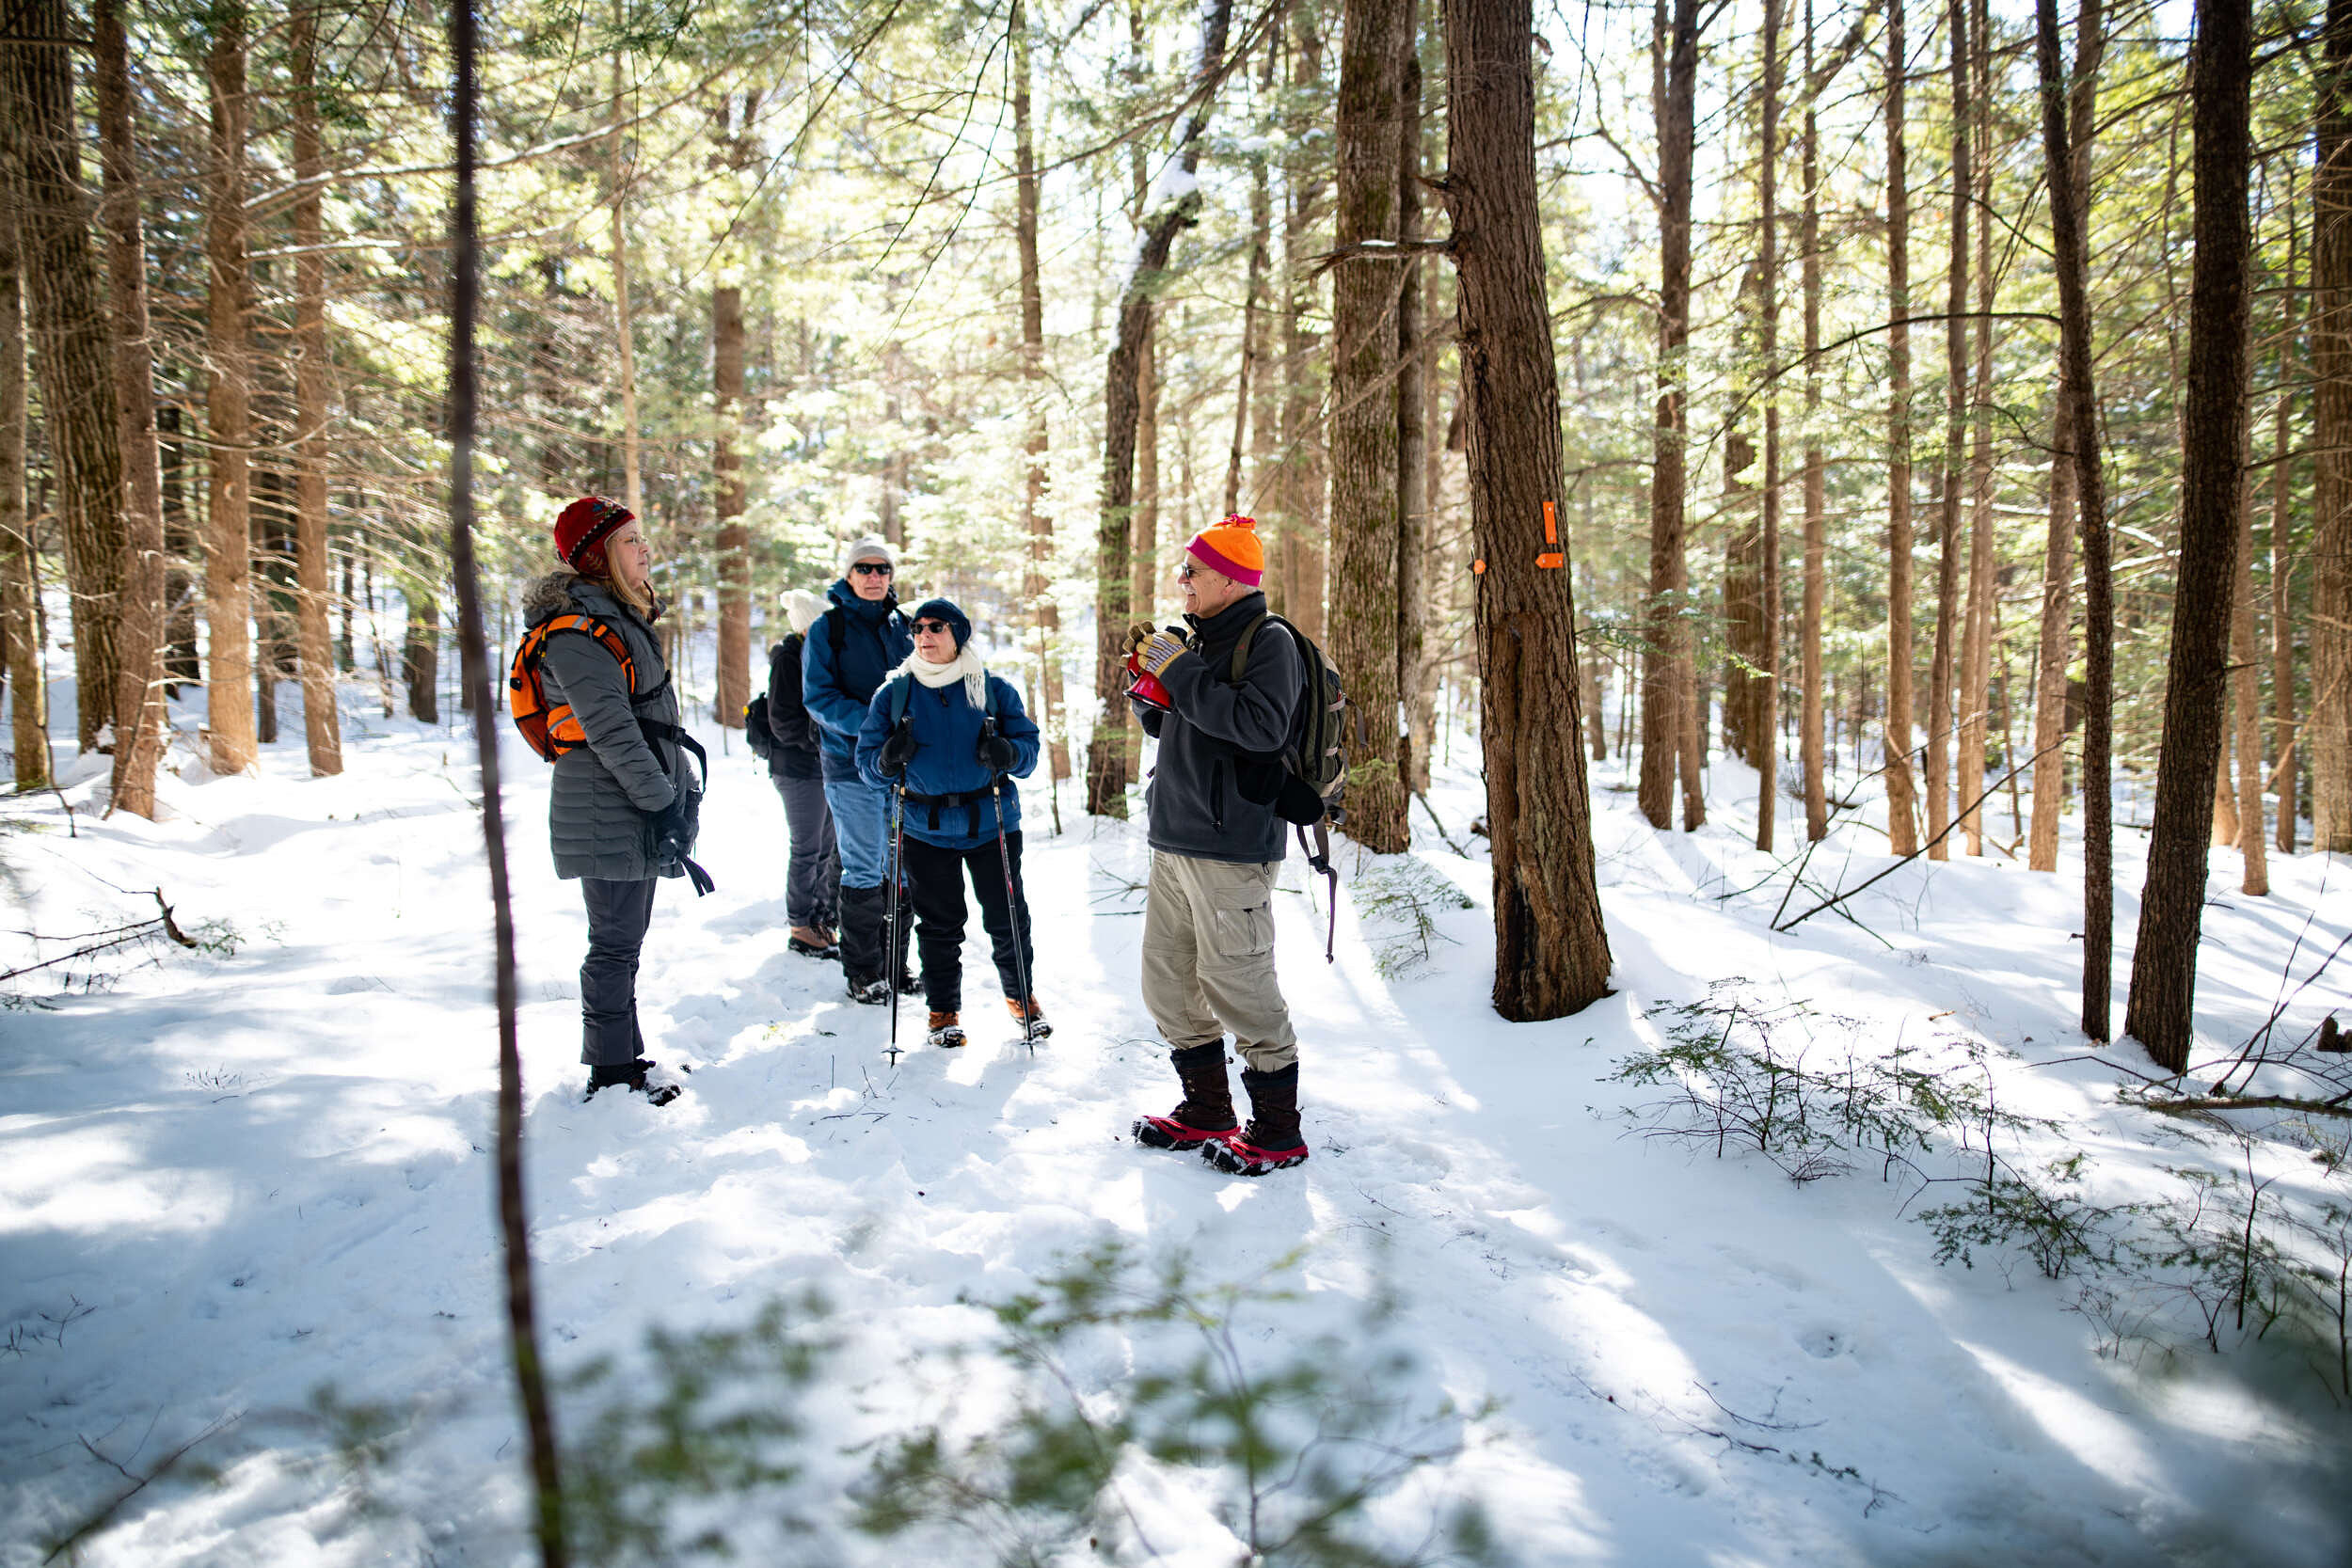 A group pauses in Hiroshi's snowy, sunlit woods. (photo © Ben Conant)